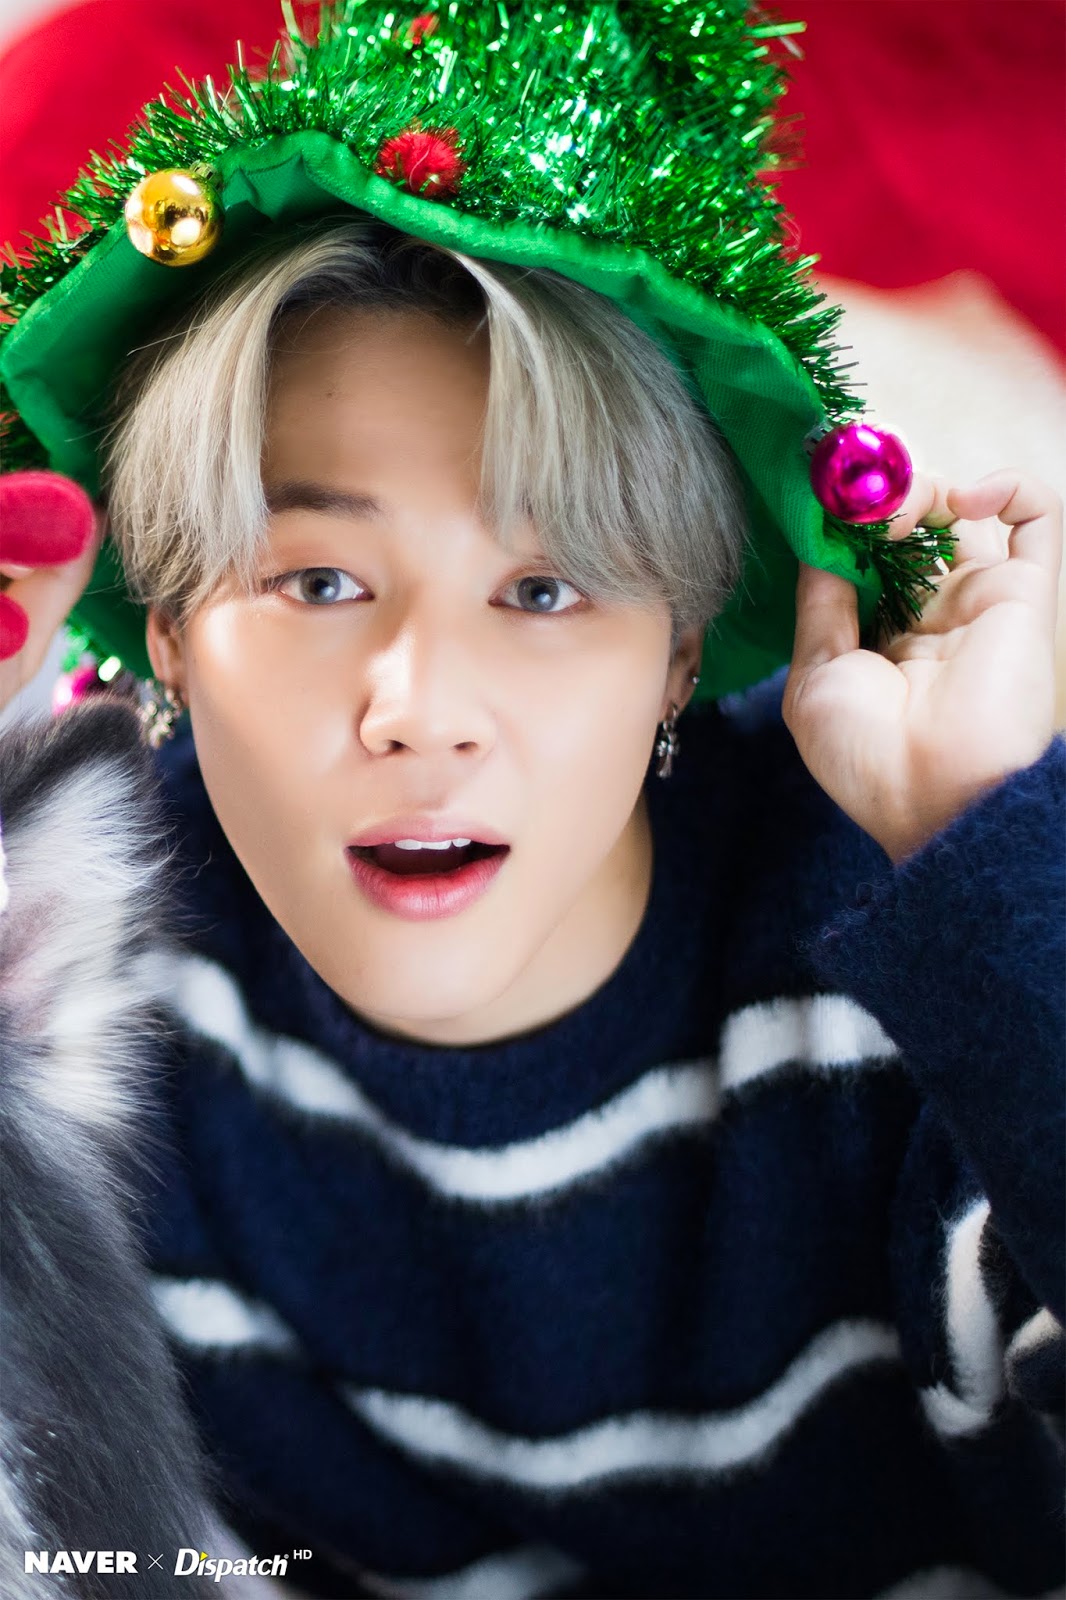 Naver X Dispatch: Bts Christmas Special 2019 Photoshoot | Circuits Of Fever